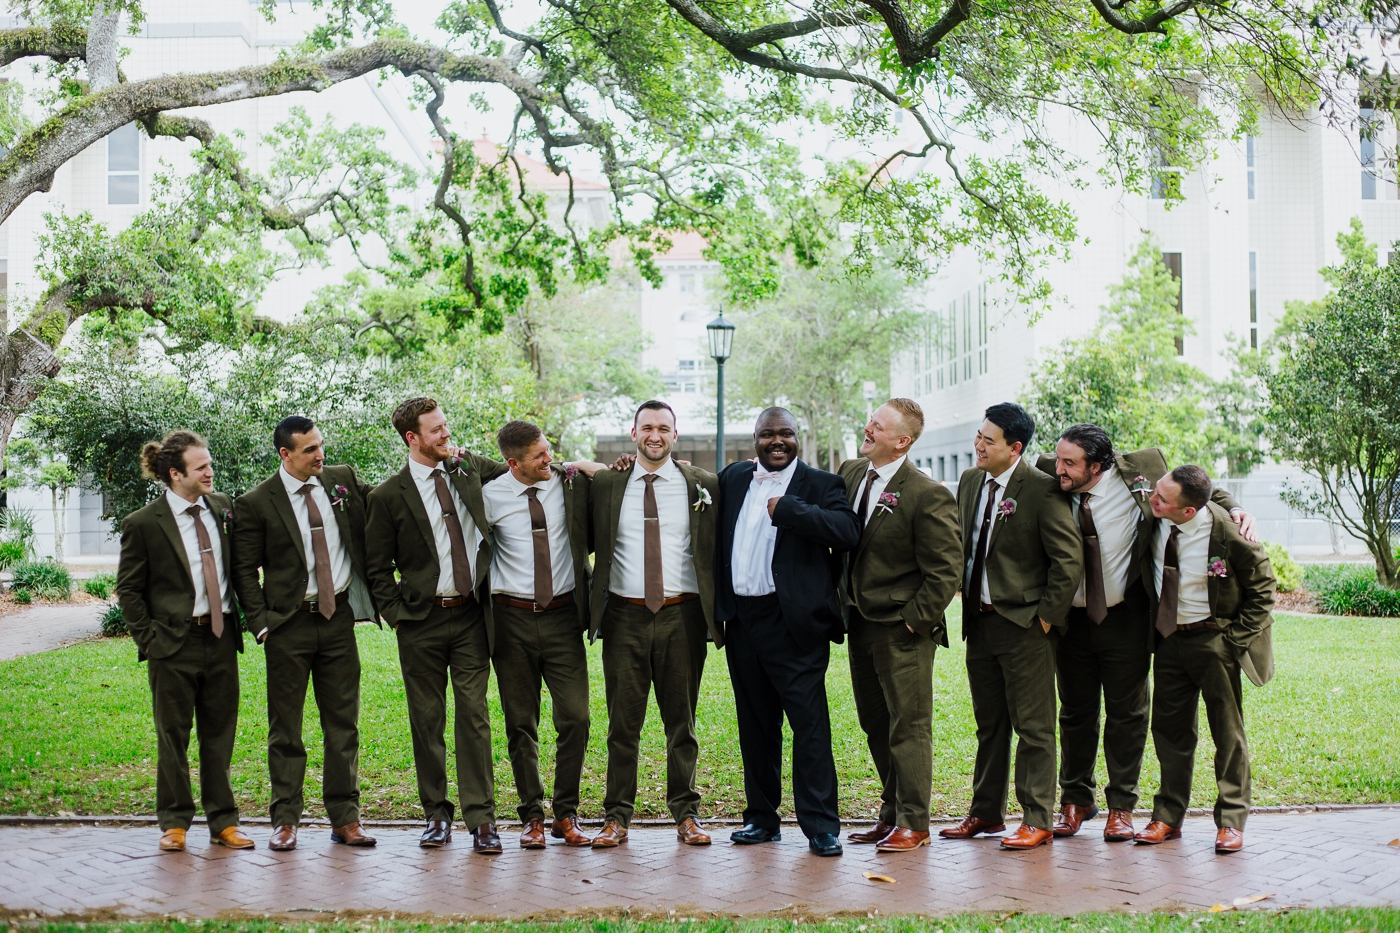 Groom and groomsmen in olive suits from Mens Warehouse